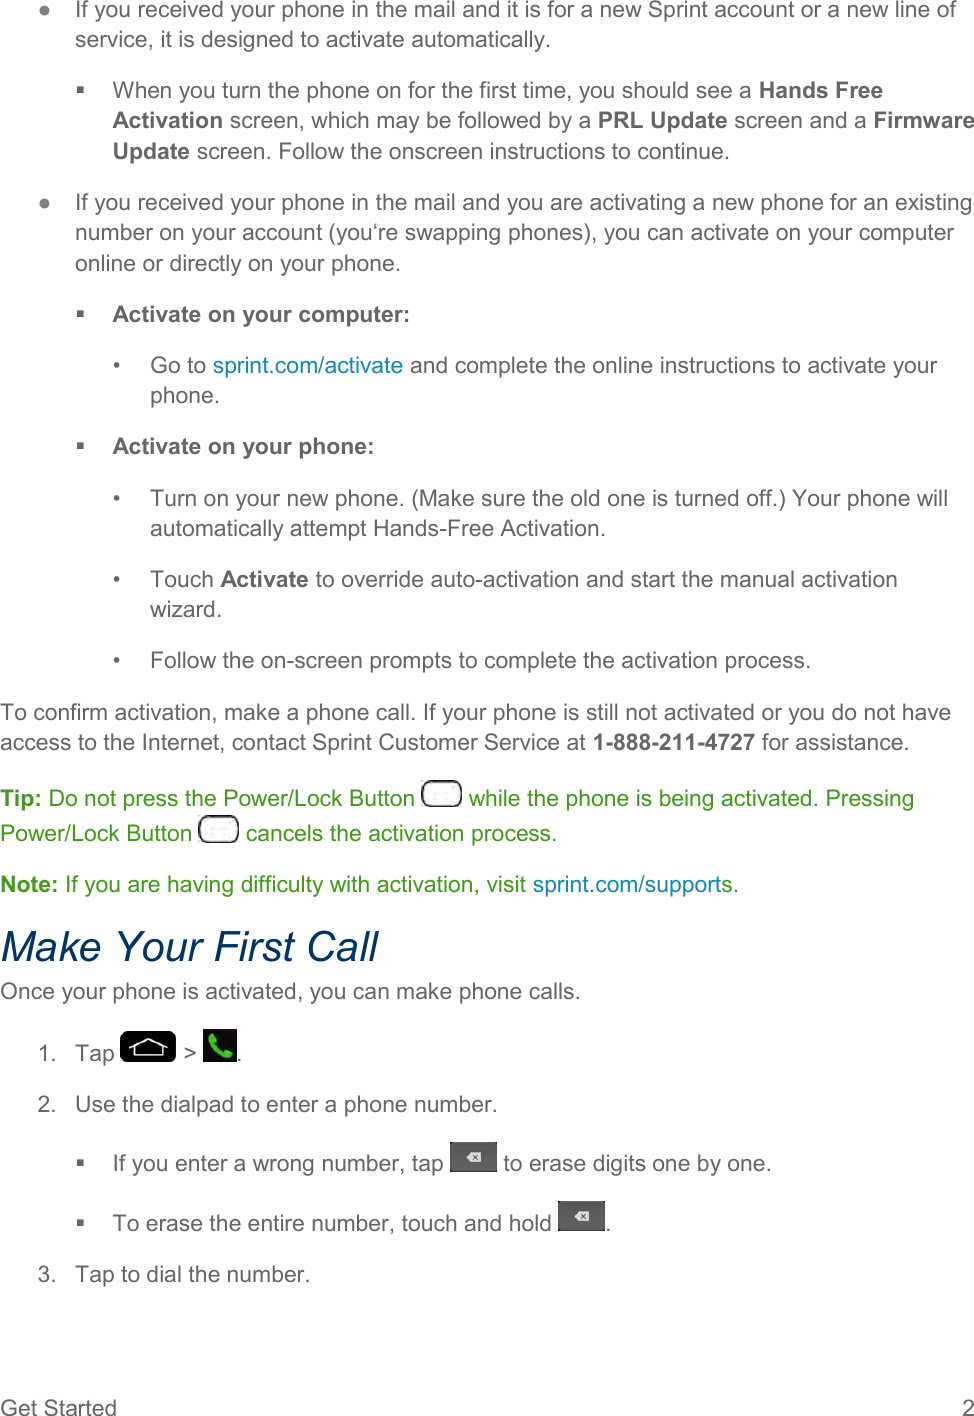 Get Started  2 ●  If you received your phone in the mail and it is for a new Sprint account or a new line of service, it is designed to activate automatically.   When you turn the phone on for the first time, you should see a Hands Free Activation screen, which may be followed by a PRL Update screen and a Firmware Update screen. Follow the onscreen instructions to continue. ●  If you received your phone in the mail and you are activating a new phone for an existing number on your account (you‘re swapping phones), you can activate on your computer online or directly on your phone.  Activate on your computer: •  Go to sprint.com/activate and complete the online instructions to activate your phone.  Activate on your phone: •  Turn on your new phone. (Make sure the old one is turned off.) Your phone will automatically attempt Hands-Free Activation. •  Touch Activate to override auto-activation and start the manual activation wizard. •  Follow the on-screen prompts to complete the activation process. To confirm activation, make a phone call. If your phone is still not activated or you do not have access to the Internet, contact Sprint Customer Service at 1-888-211-4727 for assistance. Tip: Do not press the Power/Lock Button   while the phone is being activated. Pressing Power/Lock Button   cancels the activation process. Note: If you are having difficulty with activation, visit sprint.com/supports. Make Your First Call Once your phone is activated, you can make phone calls. 1.  Tap   &gt;  . 2.  Use the dialpad to enter a phone number.   If you enter a wrong number, tap   to erase digits one by one.   To erase the entire number, touch and hold  . 3.  Tap to dial the number. 